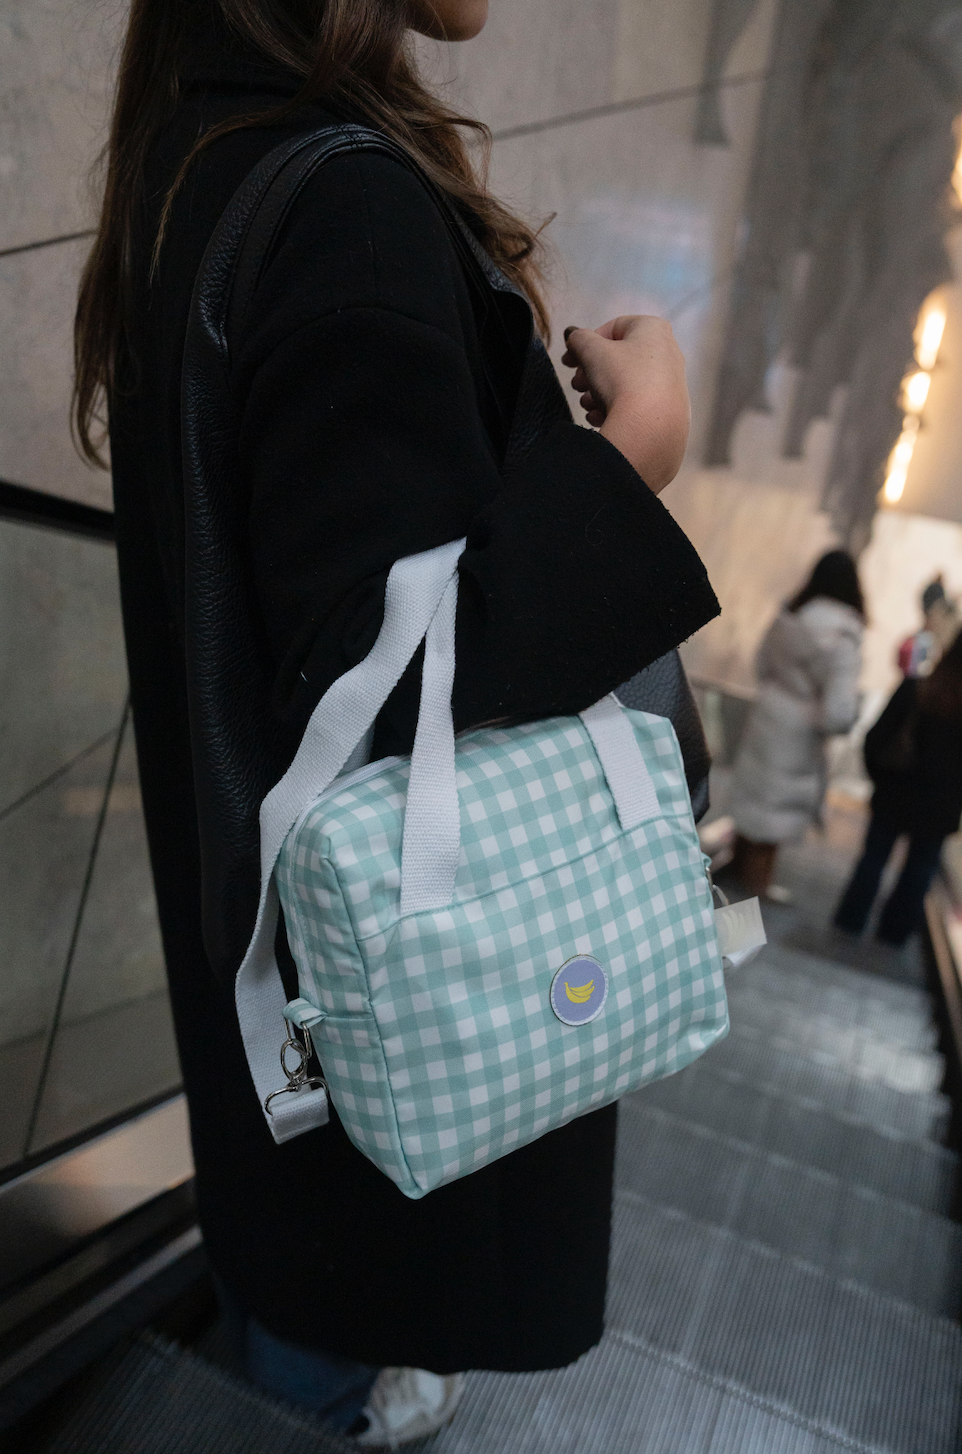 Lunch bag Vichy in Mint